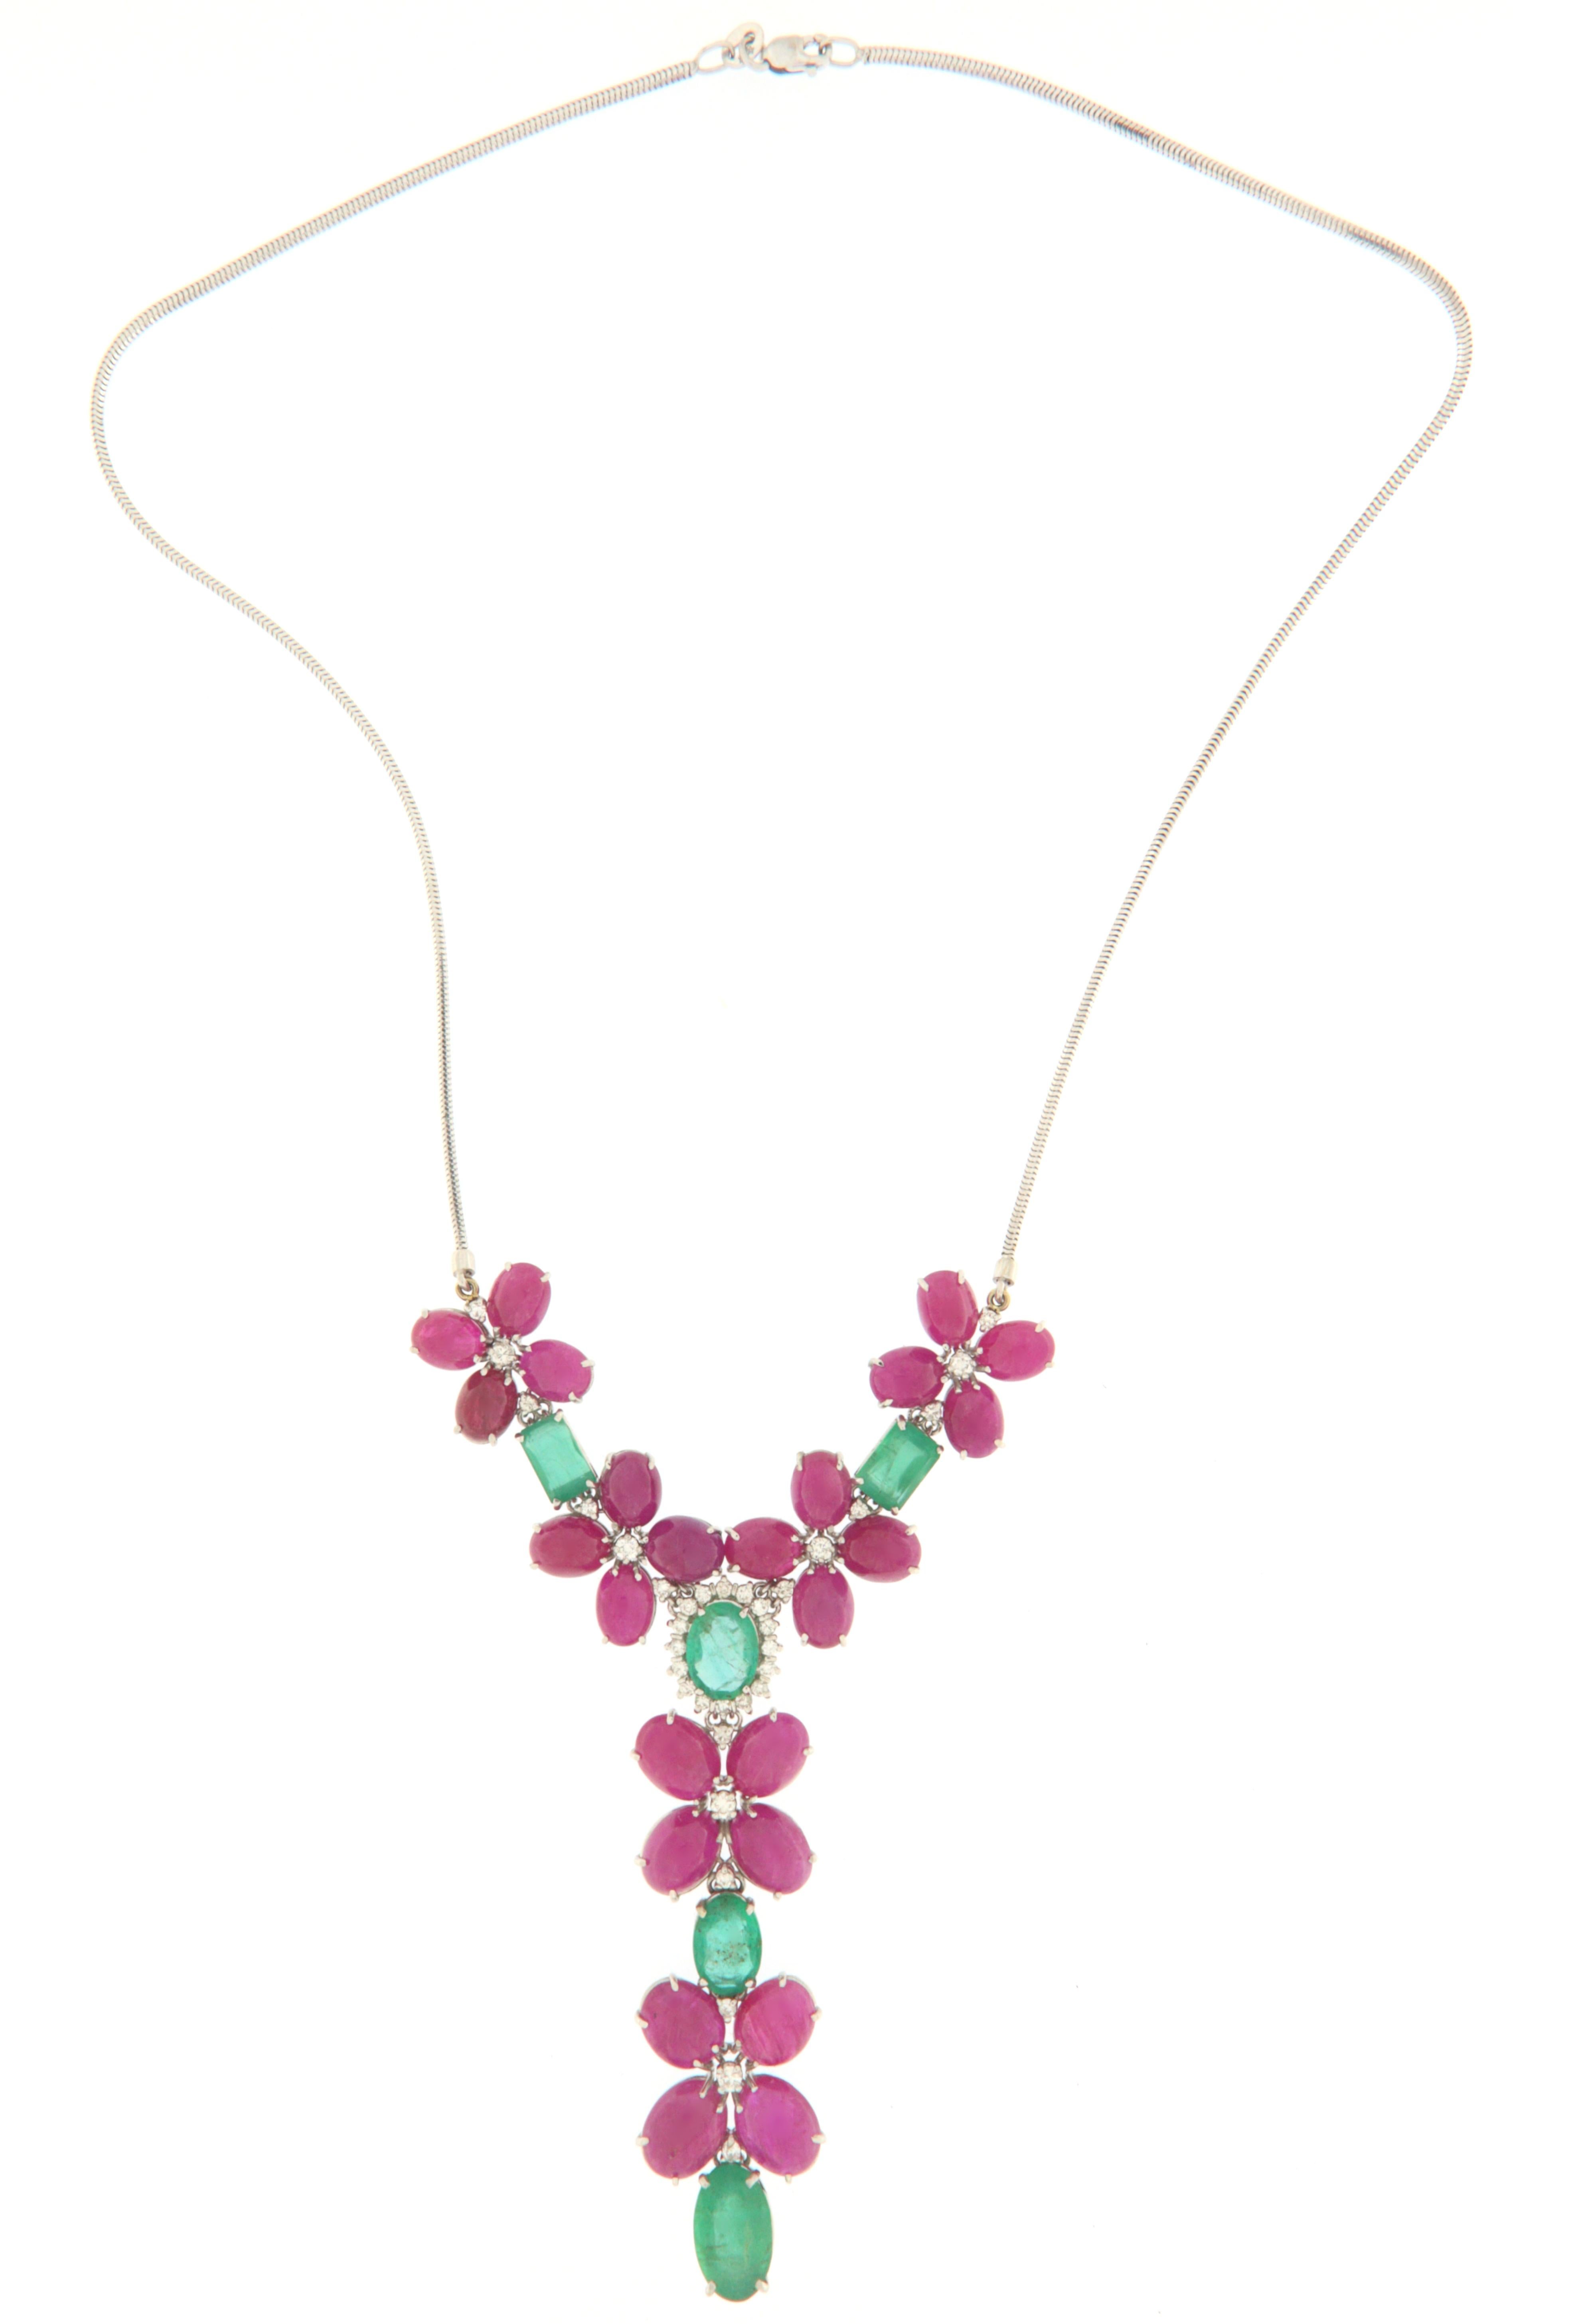 Precious necklace made entirely by hand by skilled Neapolitan goldsmiths, the drawn shapes look like flowers, made of 18-karat white gold featuring oval cabochon-cut rubies, emeralds in different shapes (rectangular and oval) of Brazilian origin and